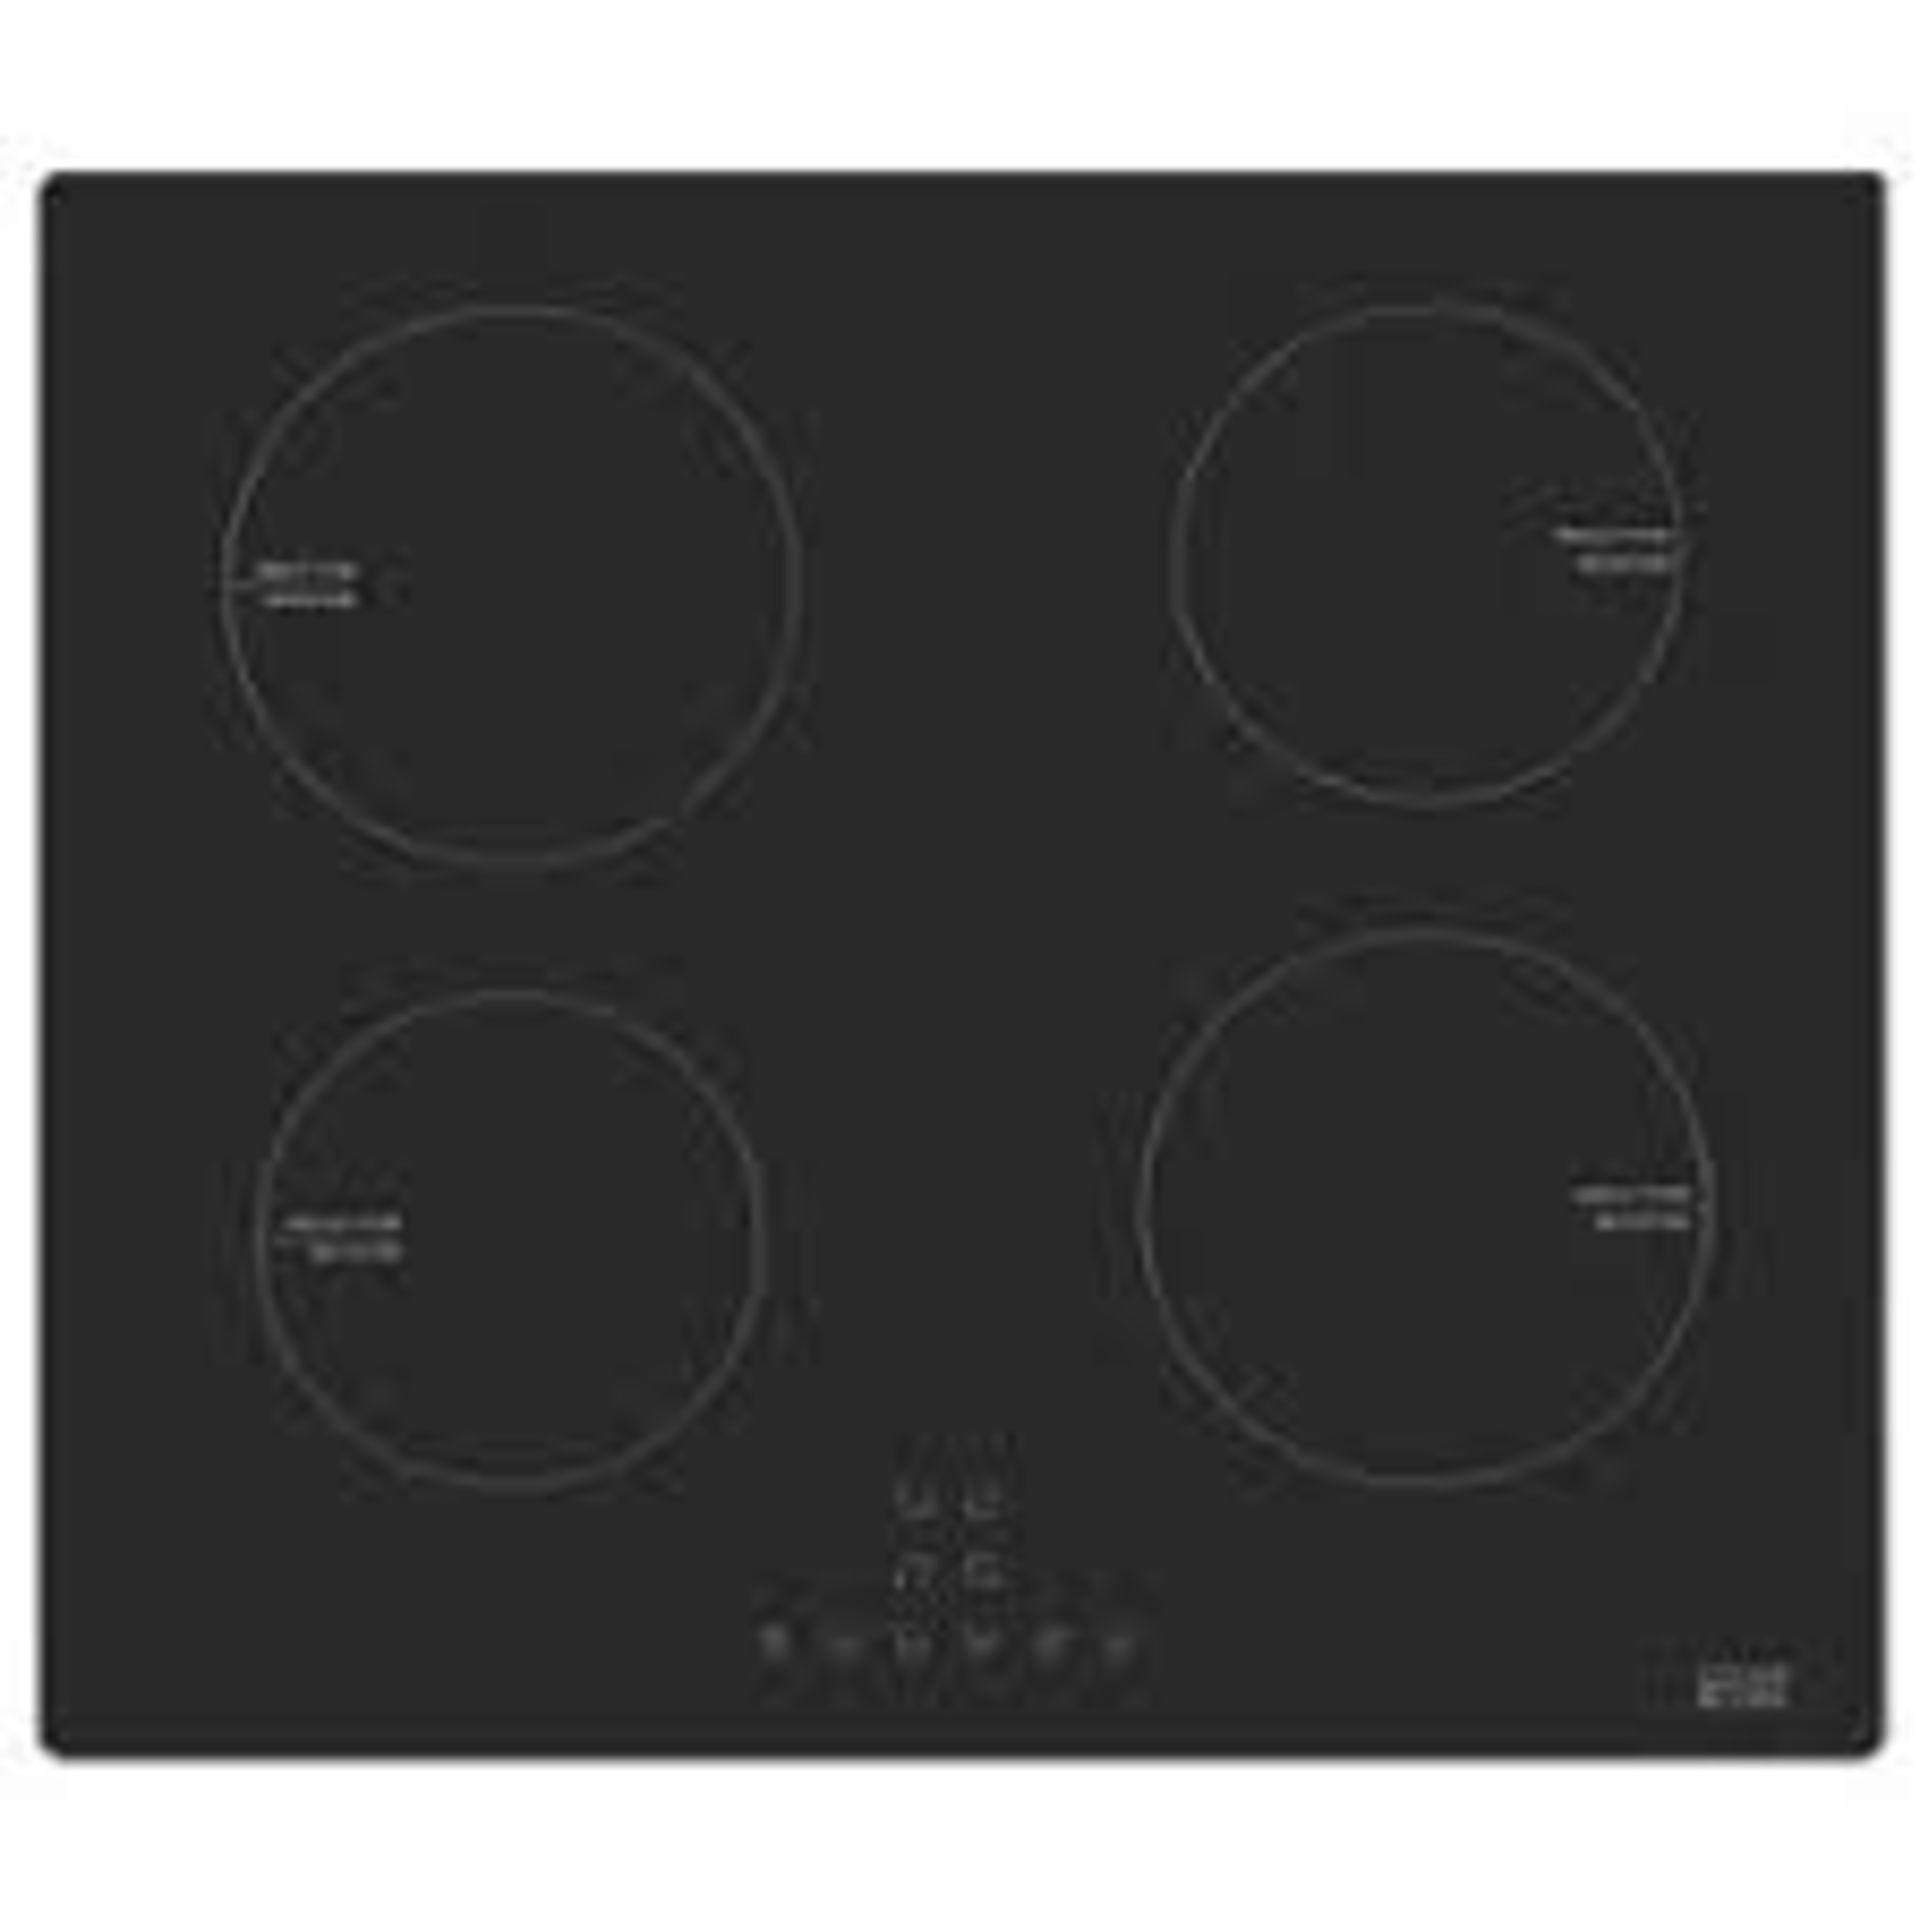 COOKE & LEWIS CLIND60 INDUCTION HOB BLACK 68MM X 590MM. - R46. Induction hob heats the surface of